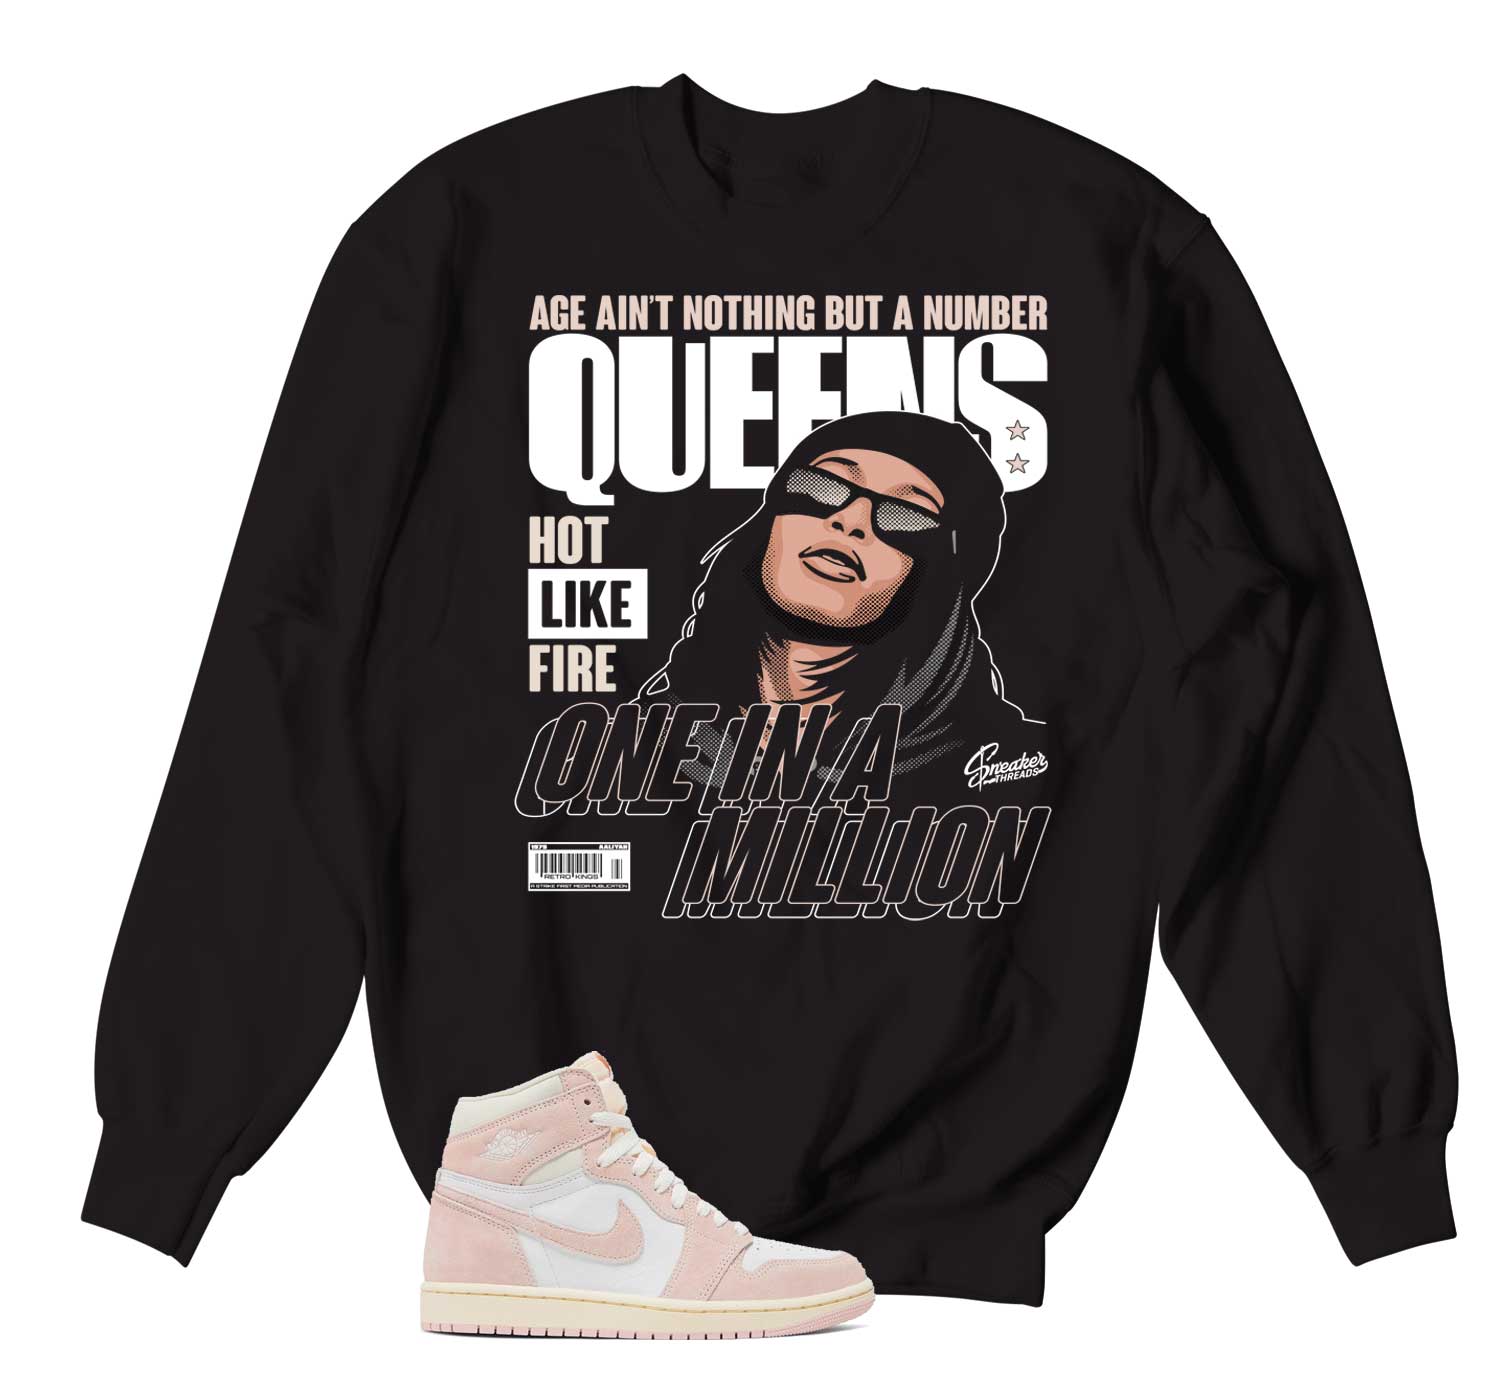 Retro 1 Washed Pink Sweater - Queens - Black